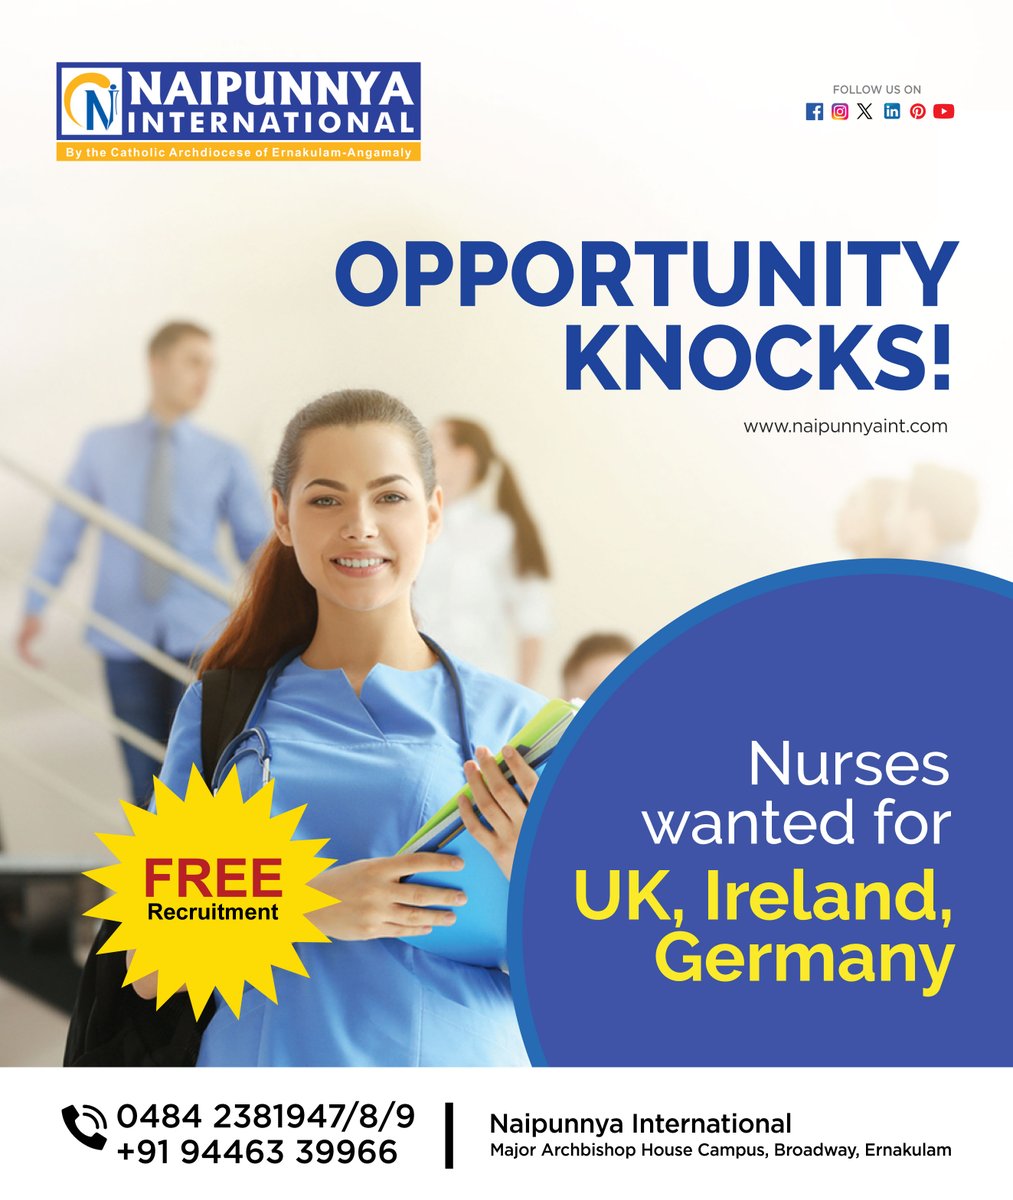 Opportunity knocks! Nurses wanted for UK, Ireland, and Germany. Enjoy free recruitment with Naipunnya International. Grab this chance to work abroad and advance your career in healthcare!
.
.
.
#OpportunityKnocks #NurseJobs #UKJobs #IrelandJobs #GermanyJobs #FreeRecruitment